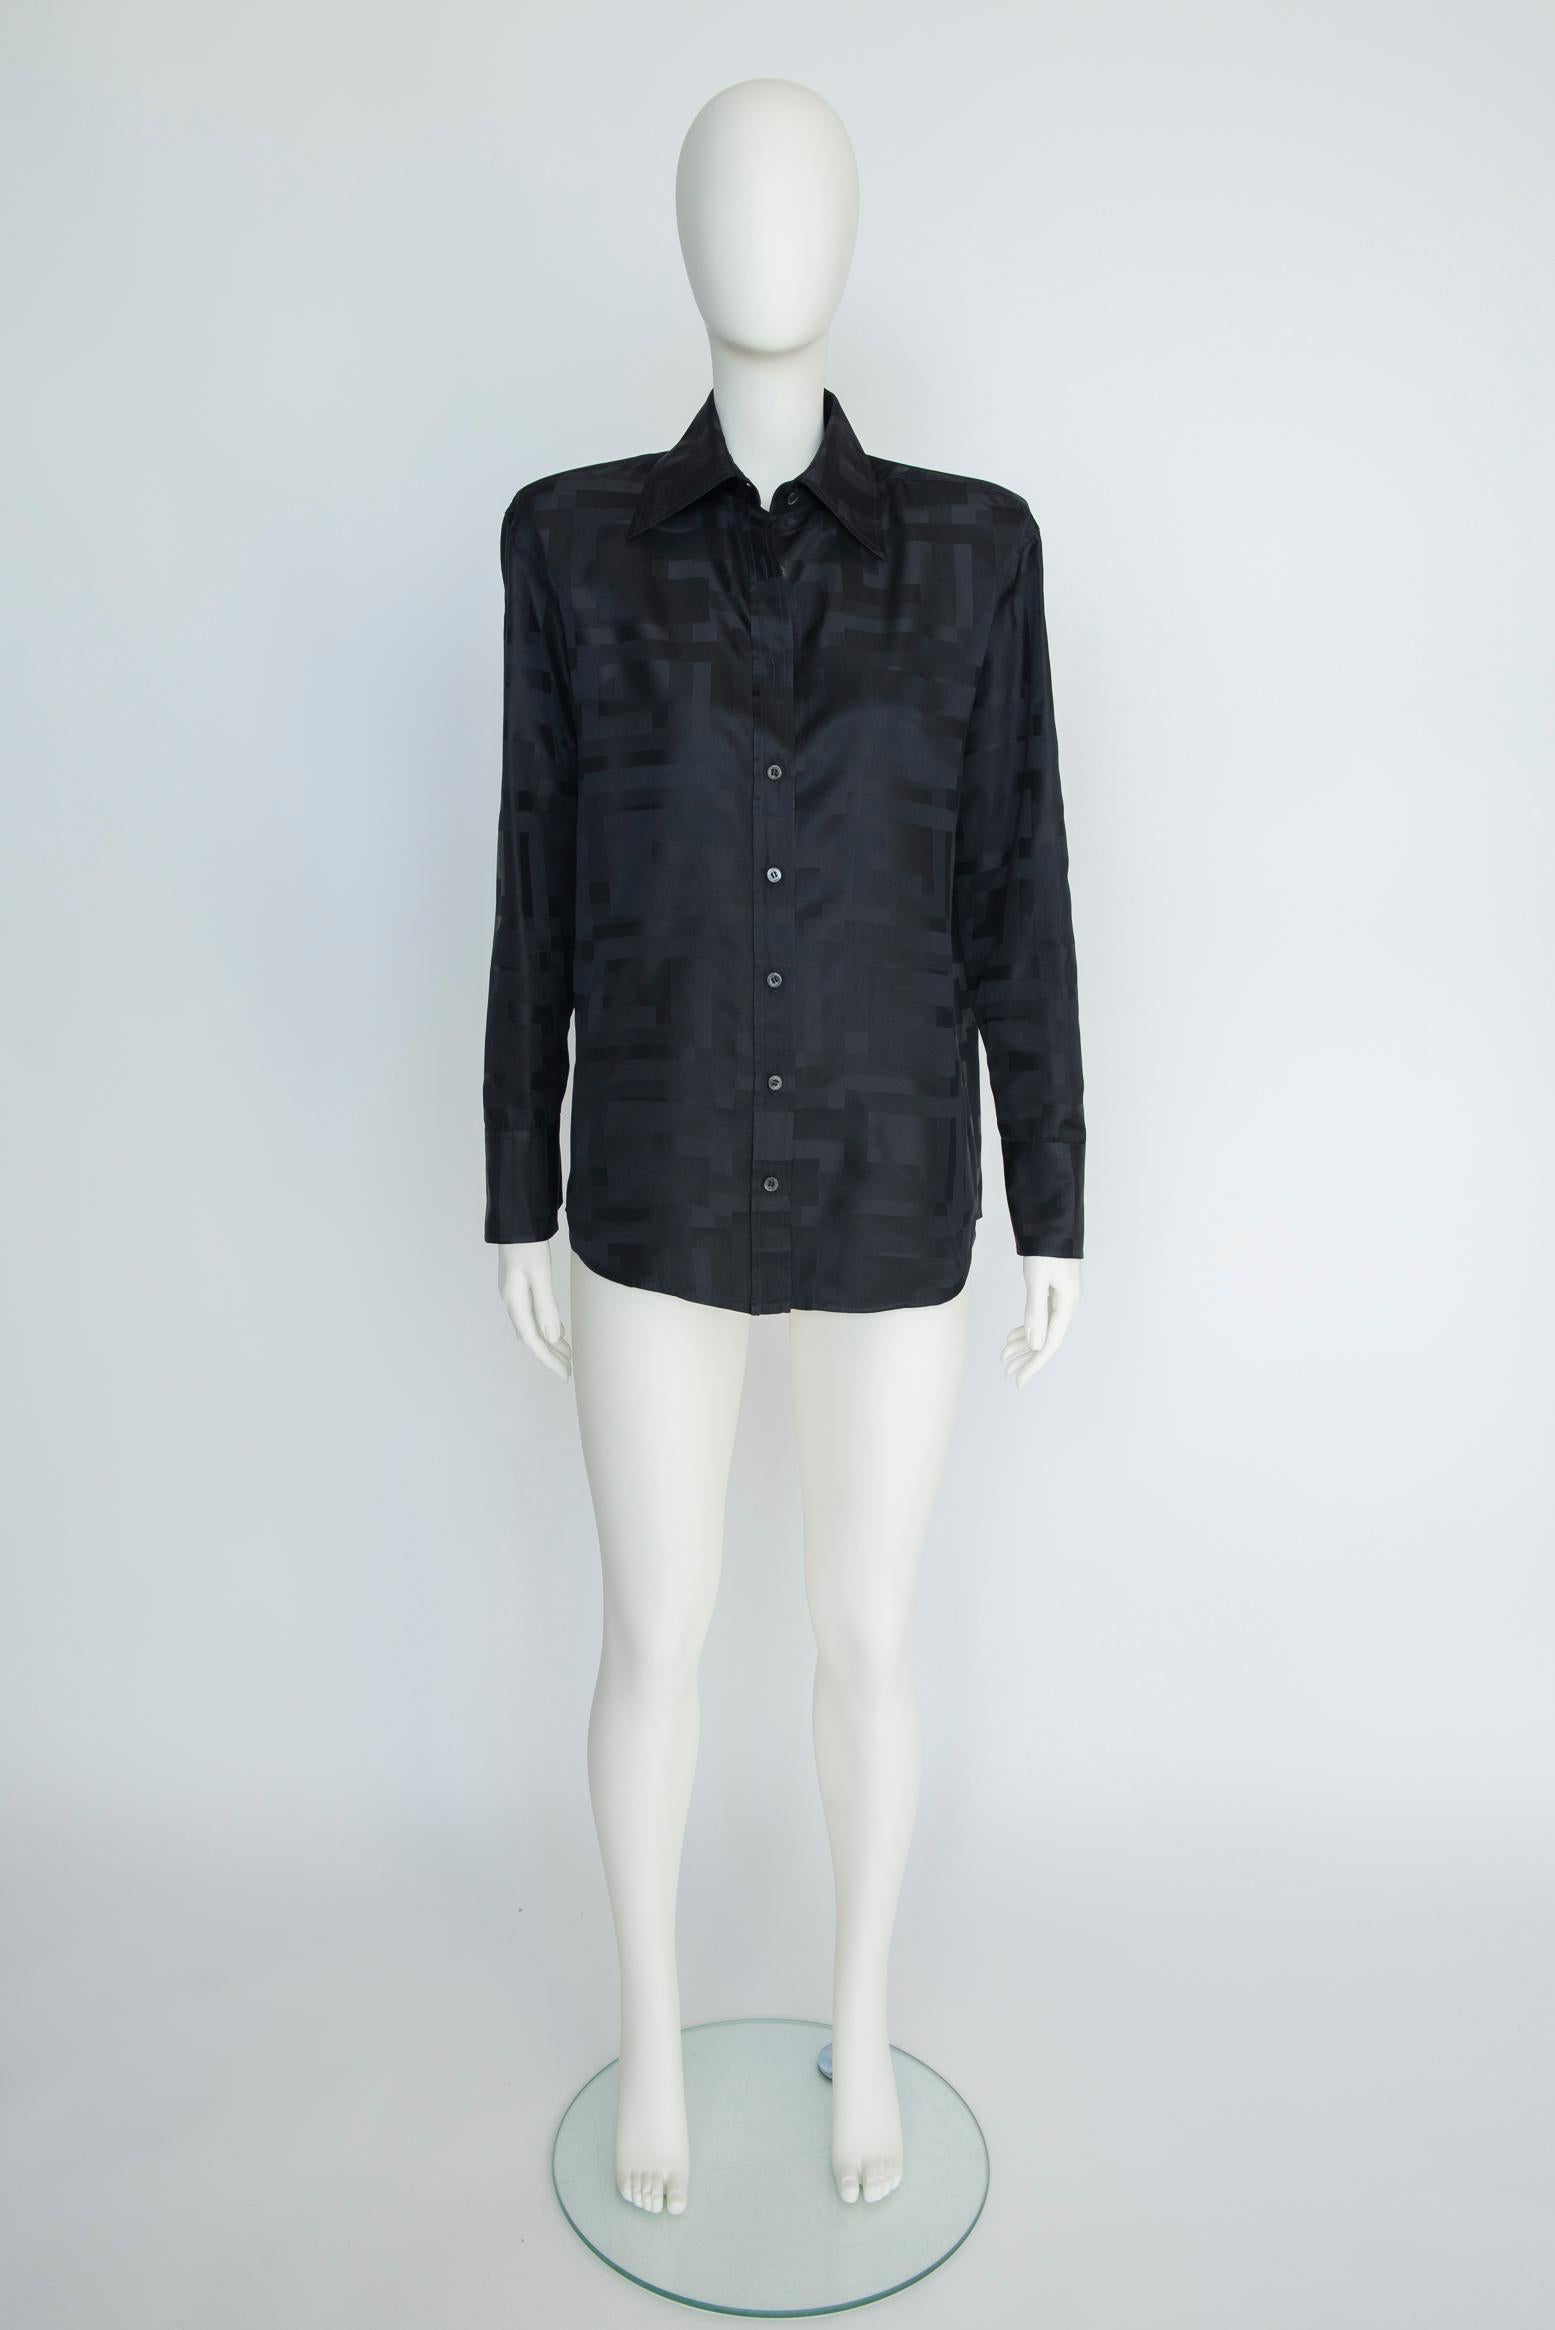 Chic and timeless, this black shirt from the iconic 1998 Spring-Summer Gucci by Tom Ford collection will prove to be a staple in any wardrobe. Jacquard-woven with lustrous squares GG logo throughout, the shirt features a point collar and buttoned